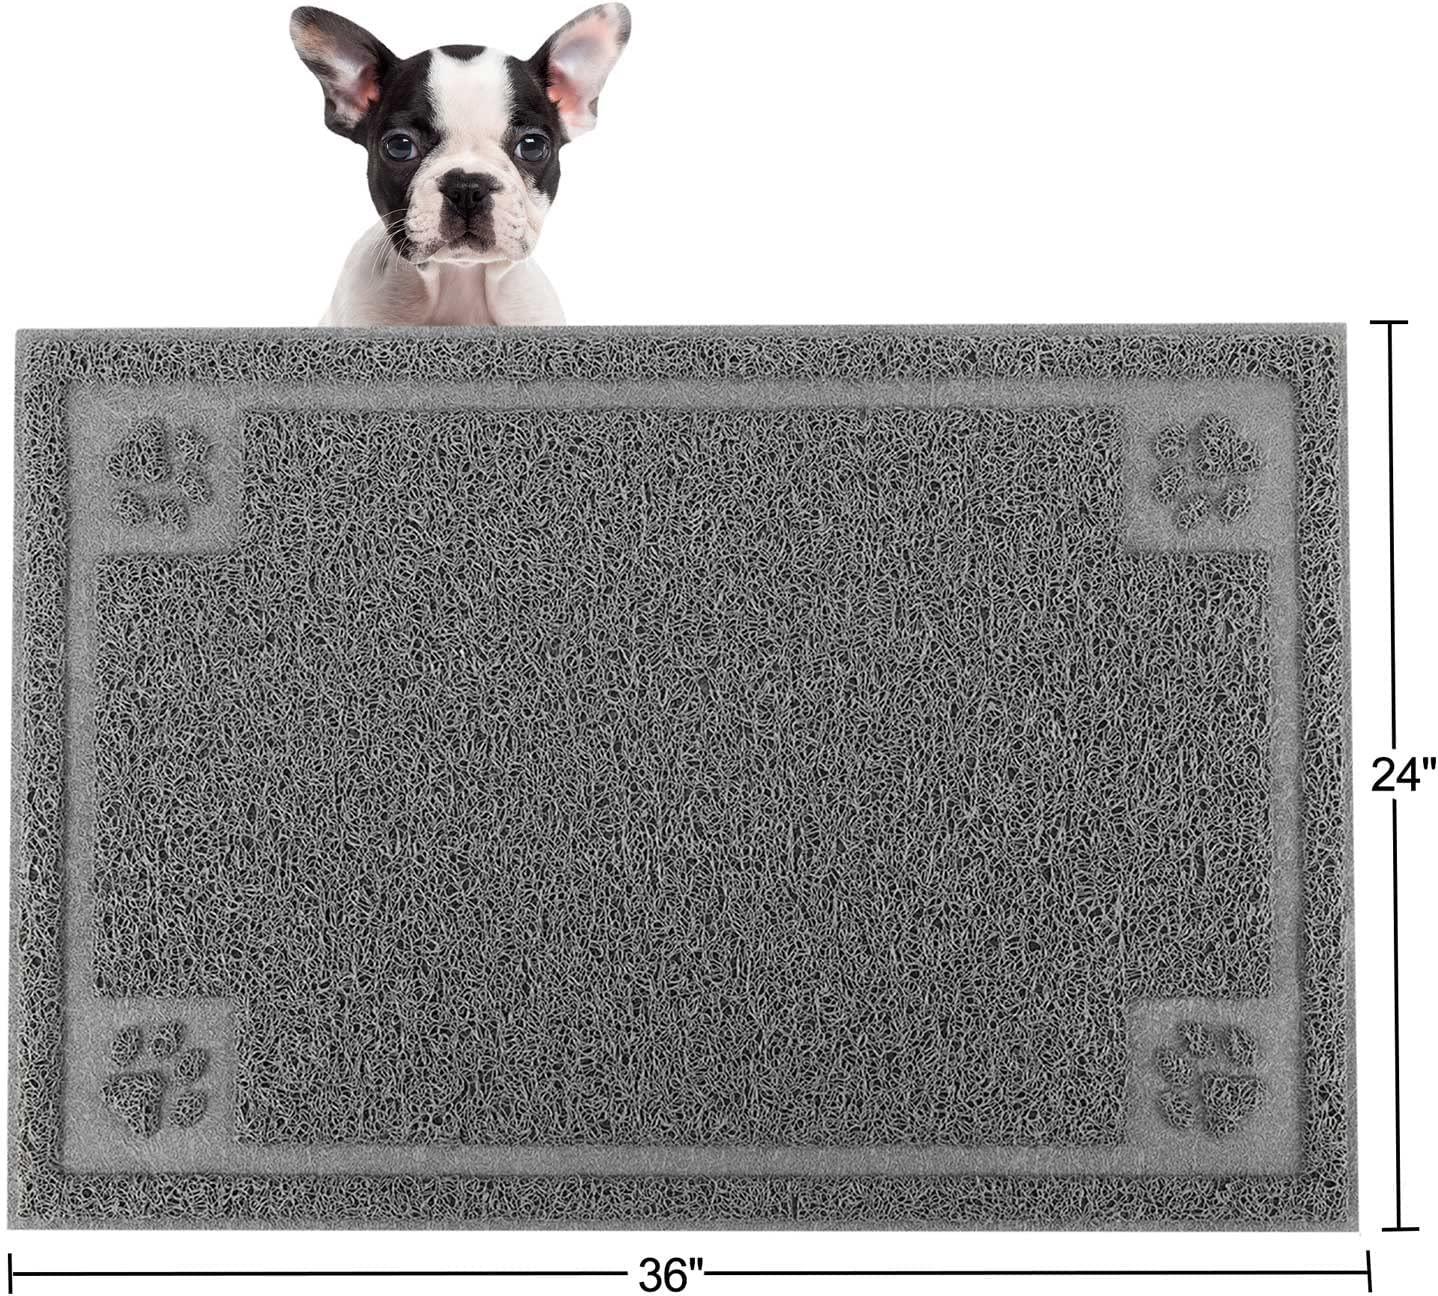 Dog Feeding Mats for Food and Water - 36 x 24 Extra Large